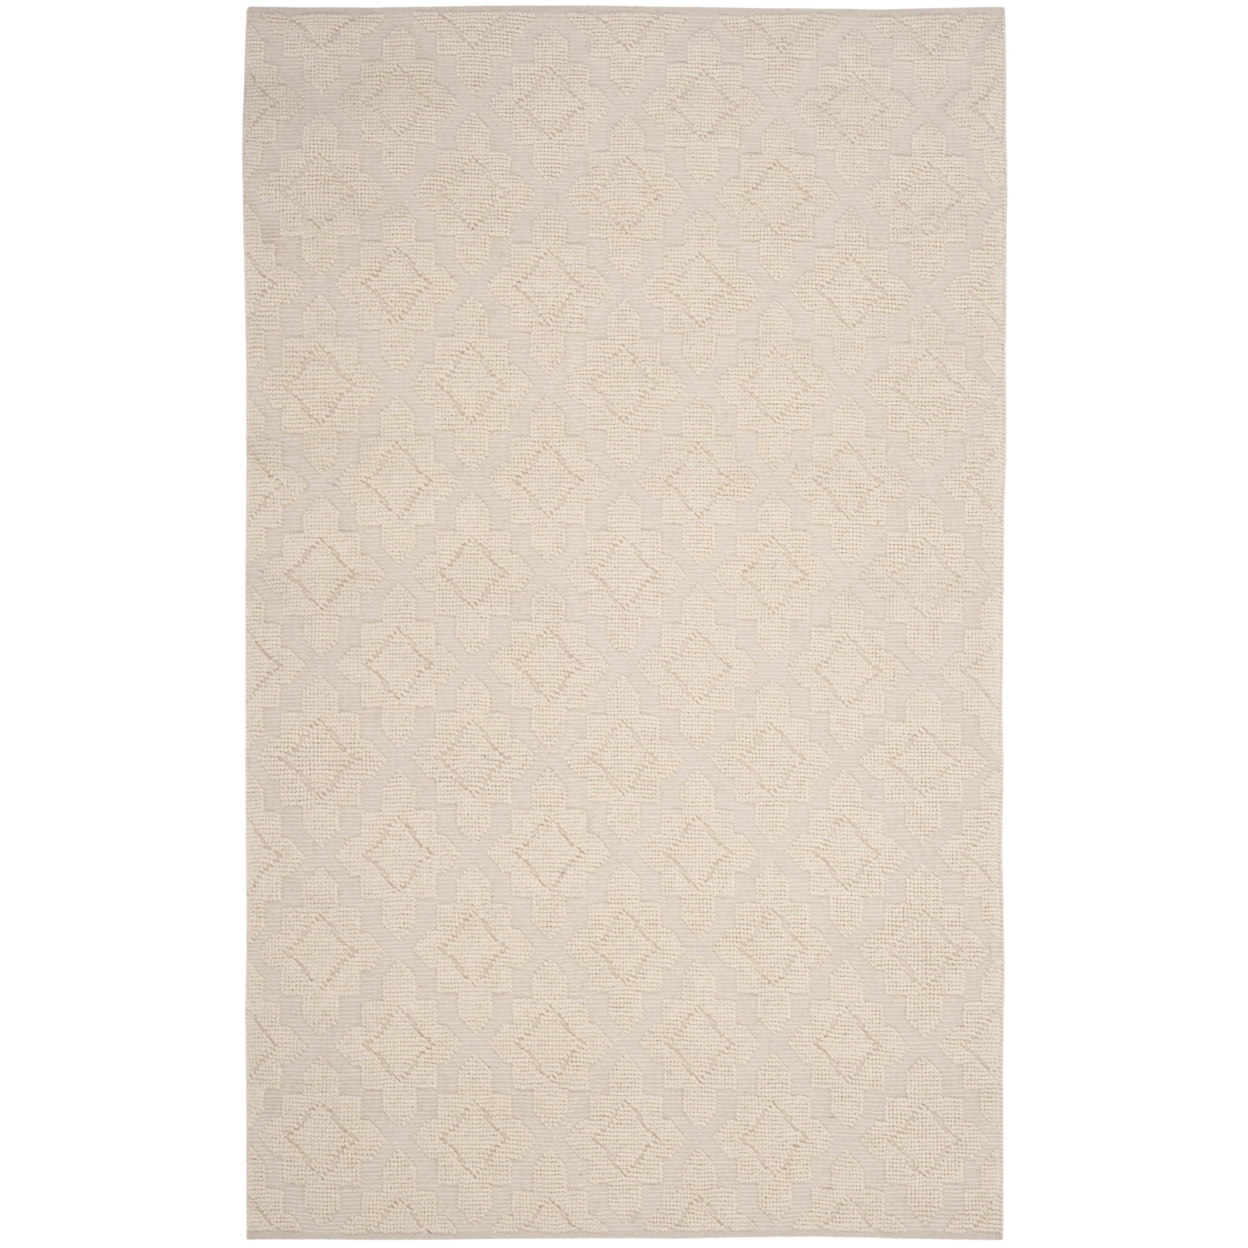 SAFAVIEH Vermont Collection VRM103A Handwoven Ivory Rug - 4 X 6